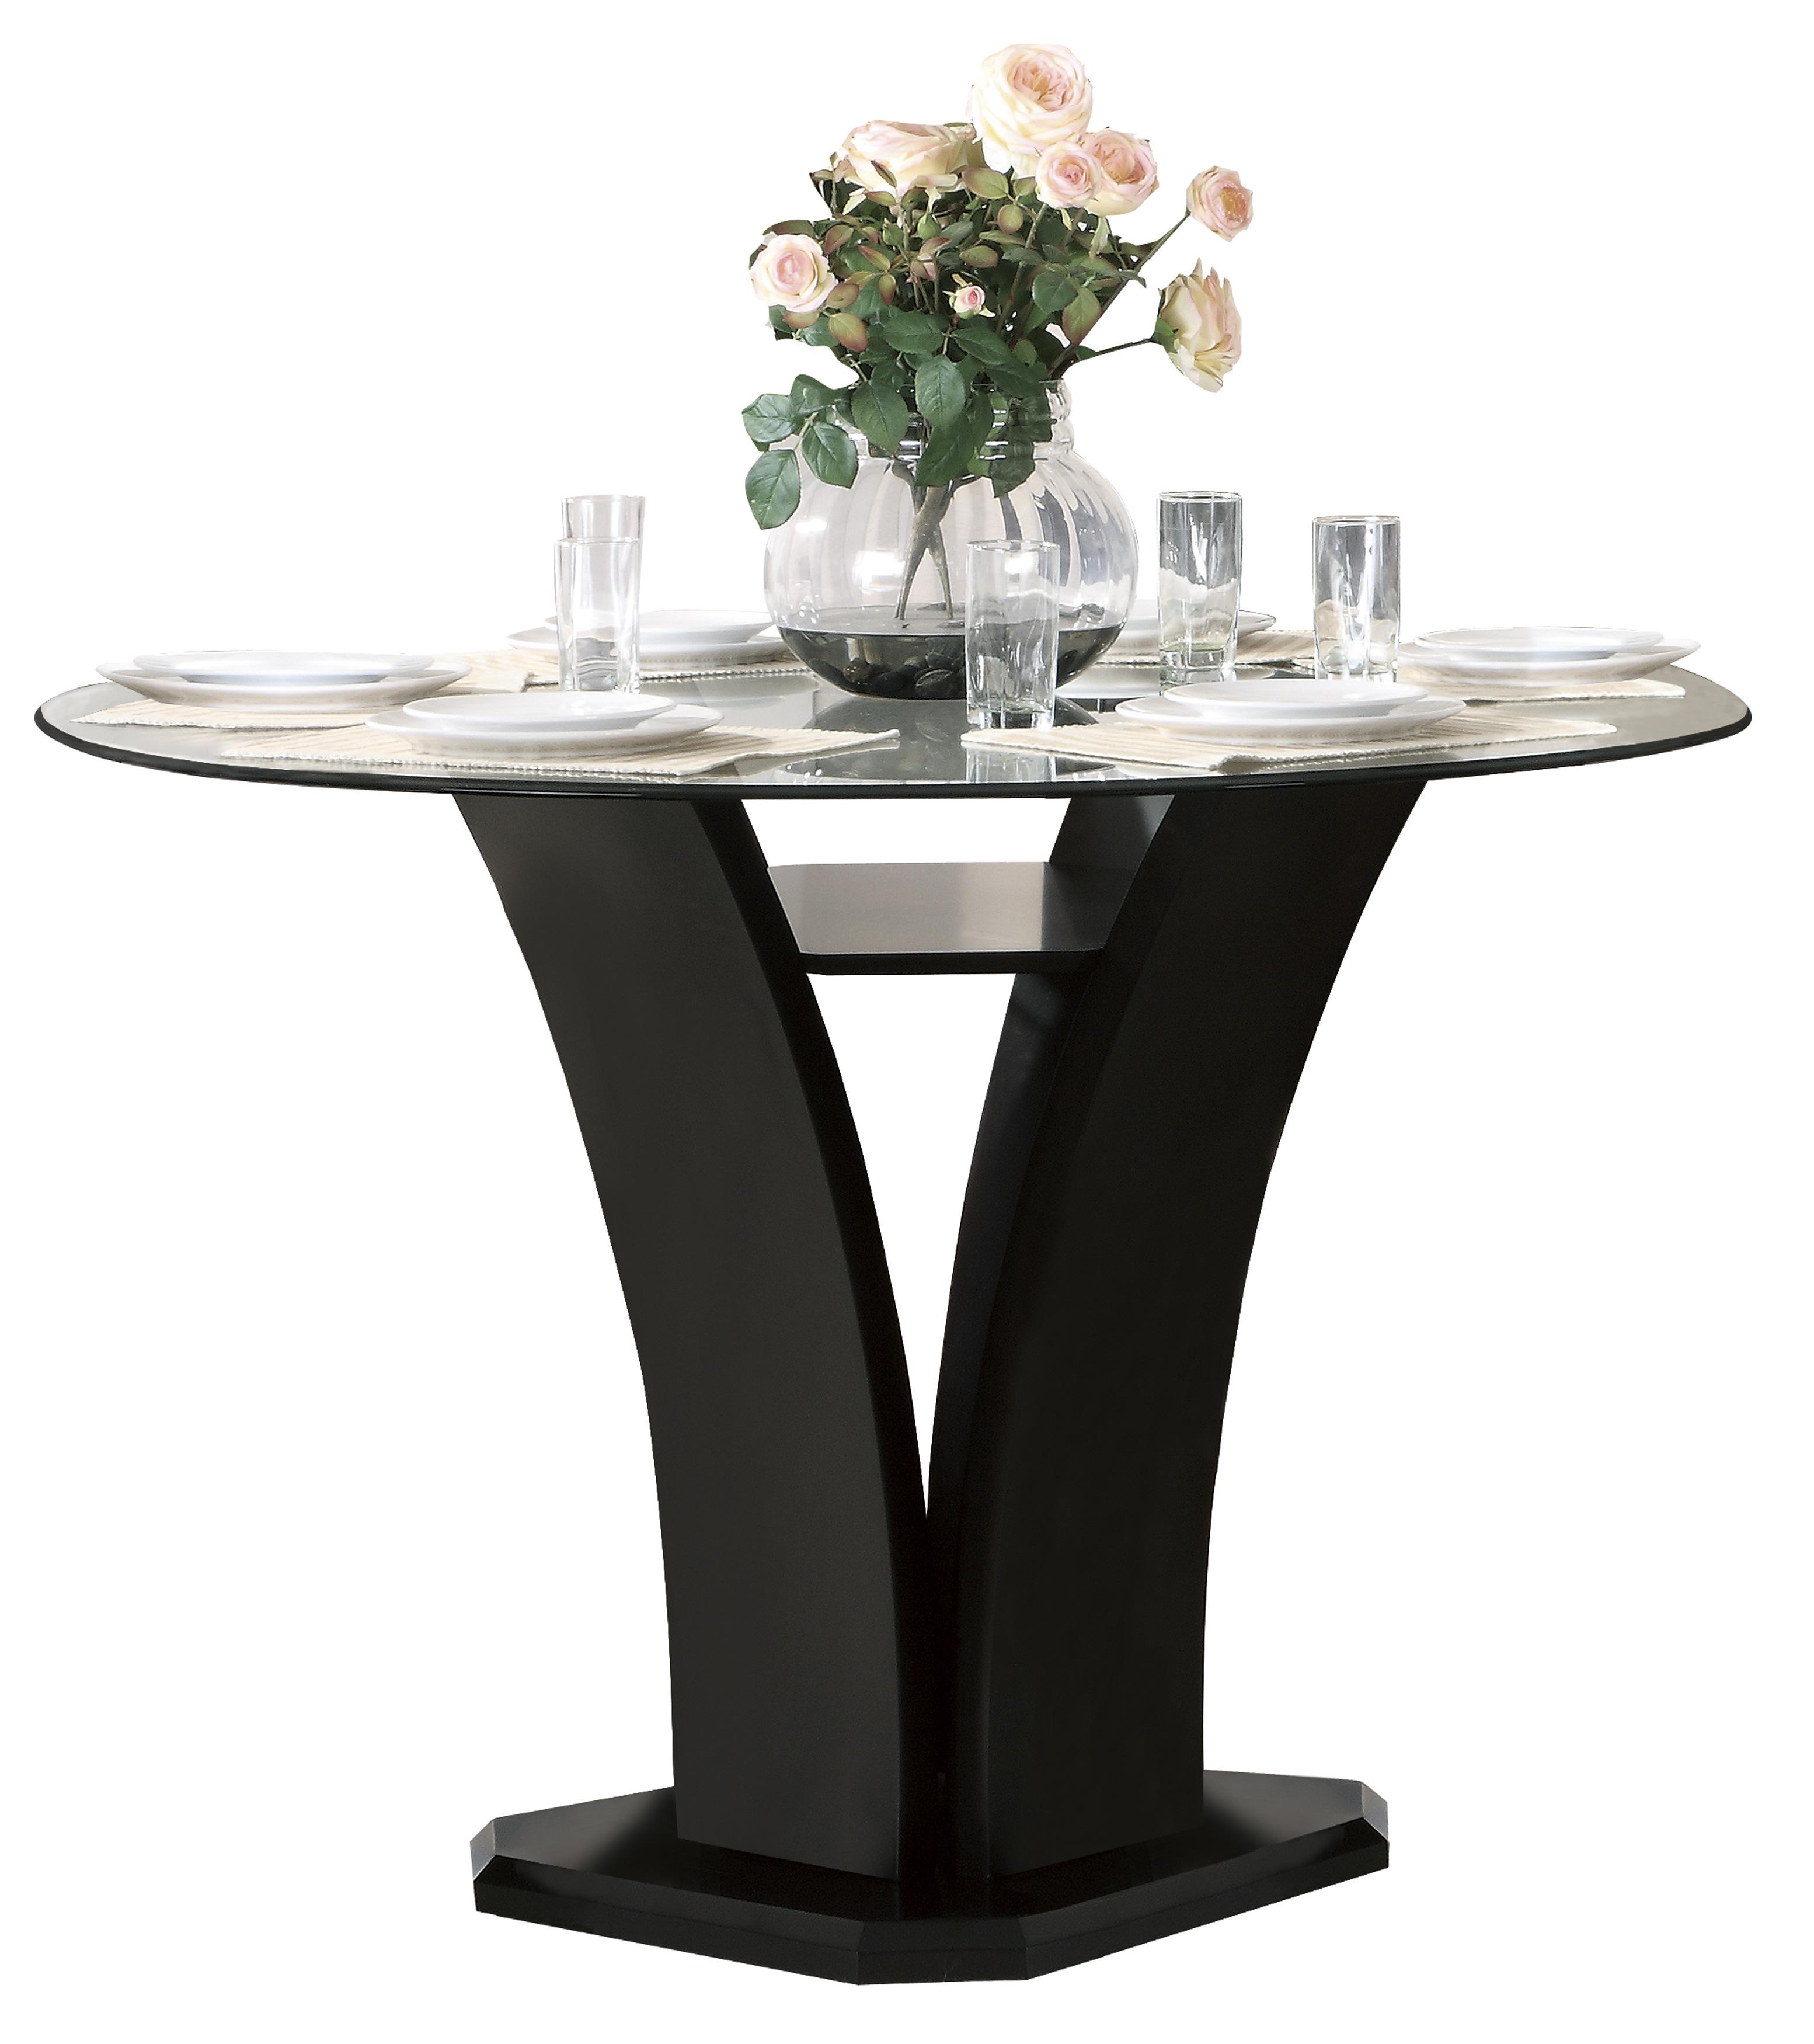 Contemporary Counter Height Table 710-36RD* Daisy 710-36RD* in Espresso 